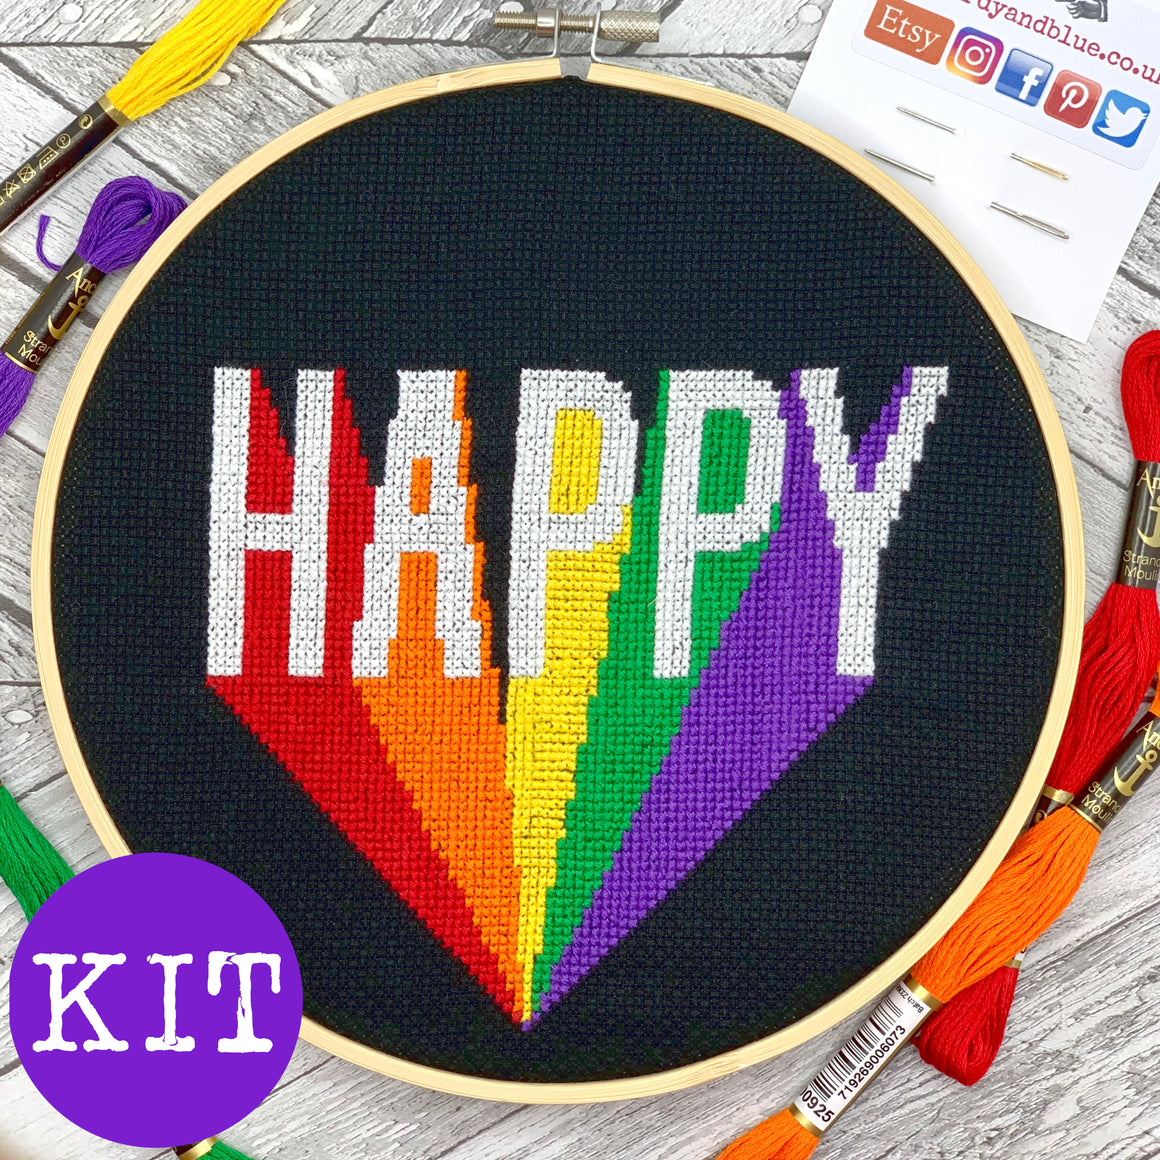 CROSS STITCH KIT - Happy (complete kit including 8" hoop)